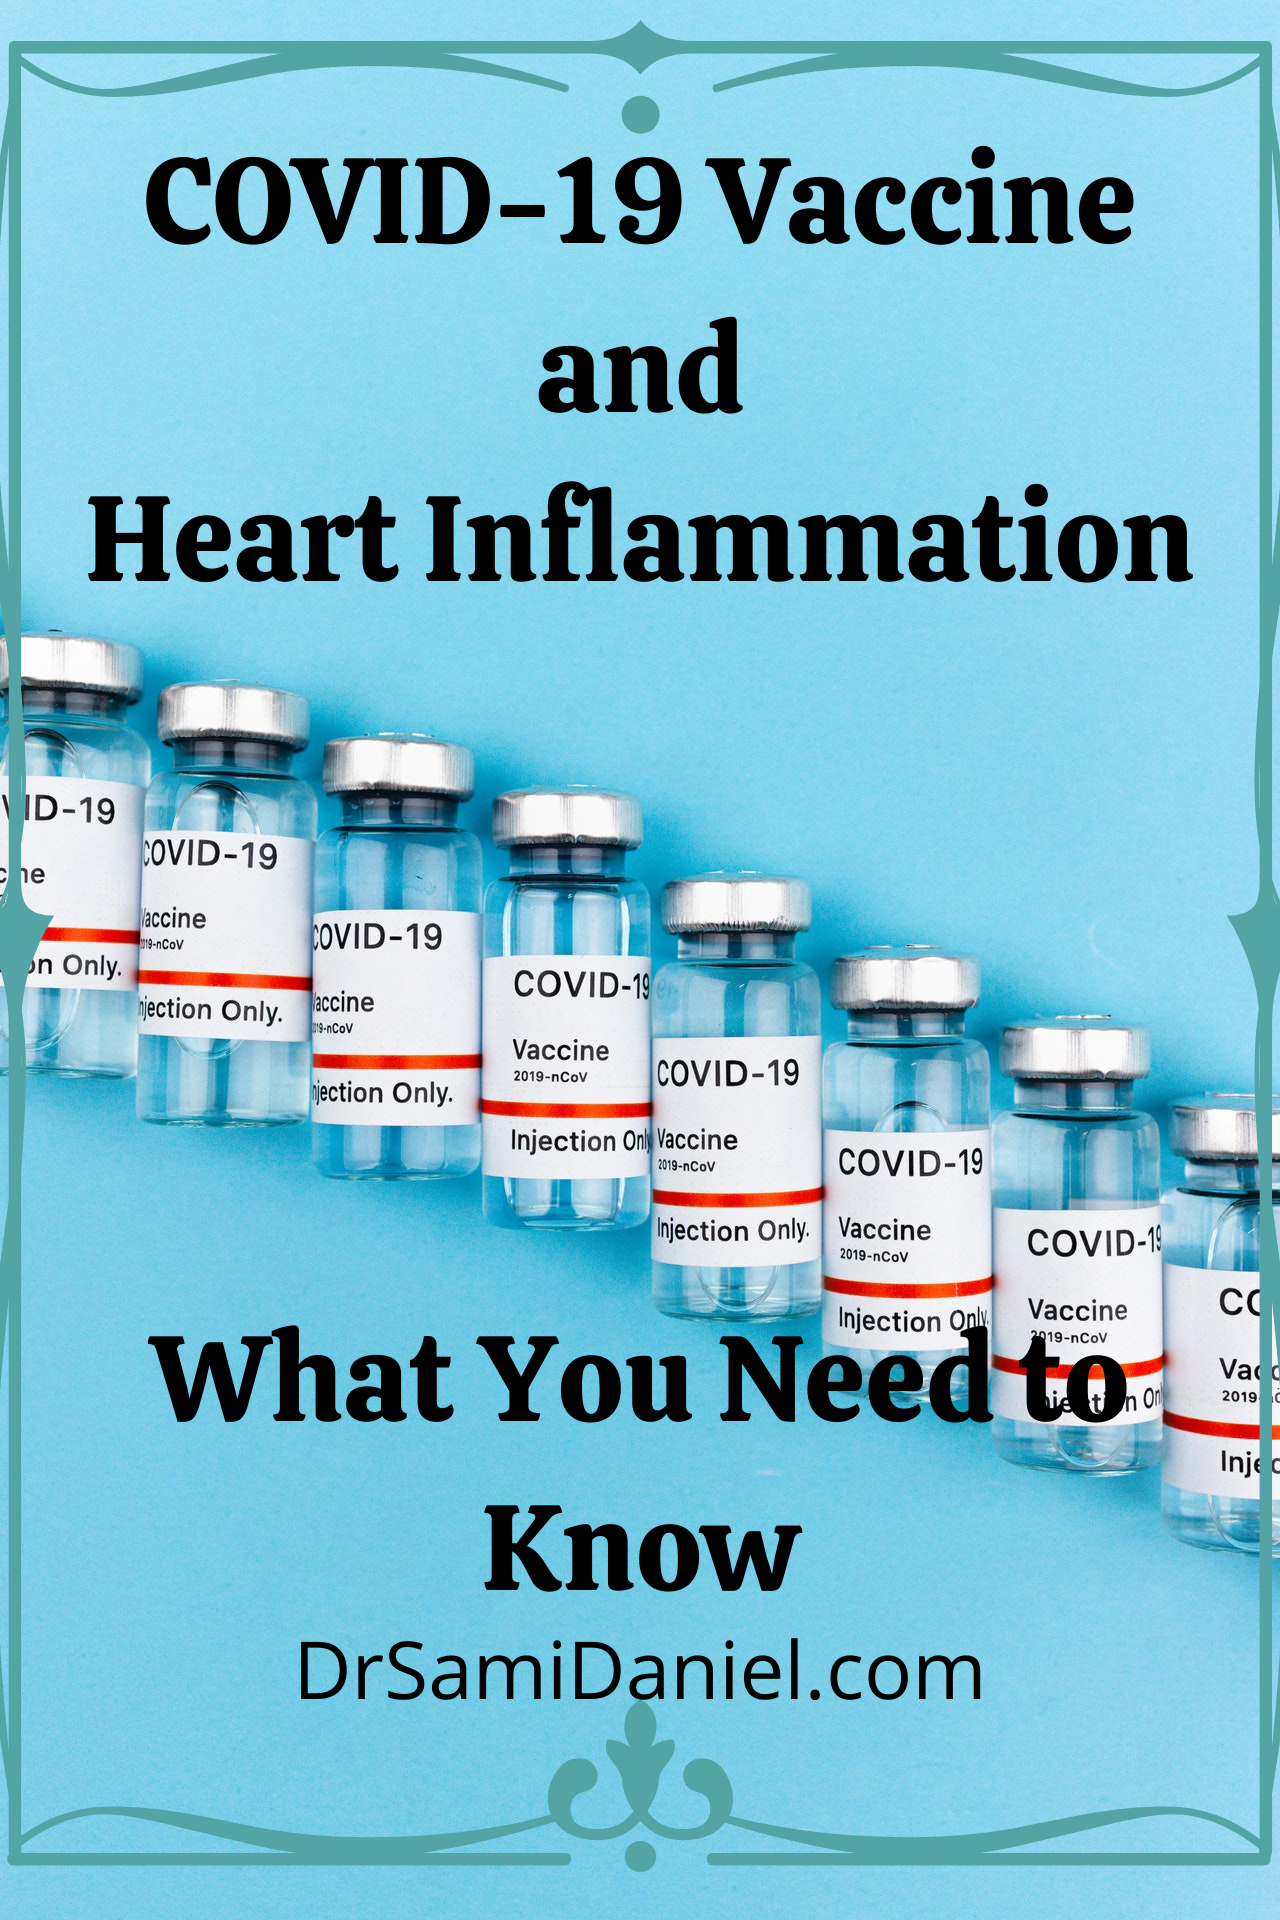 Covid-19 Vaccine and myocarditis and pericarditis